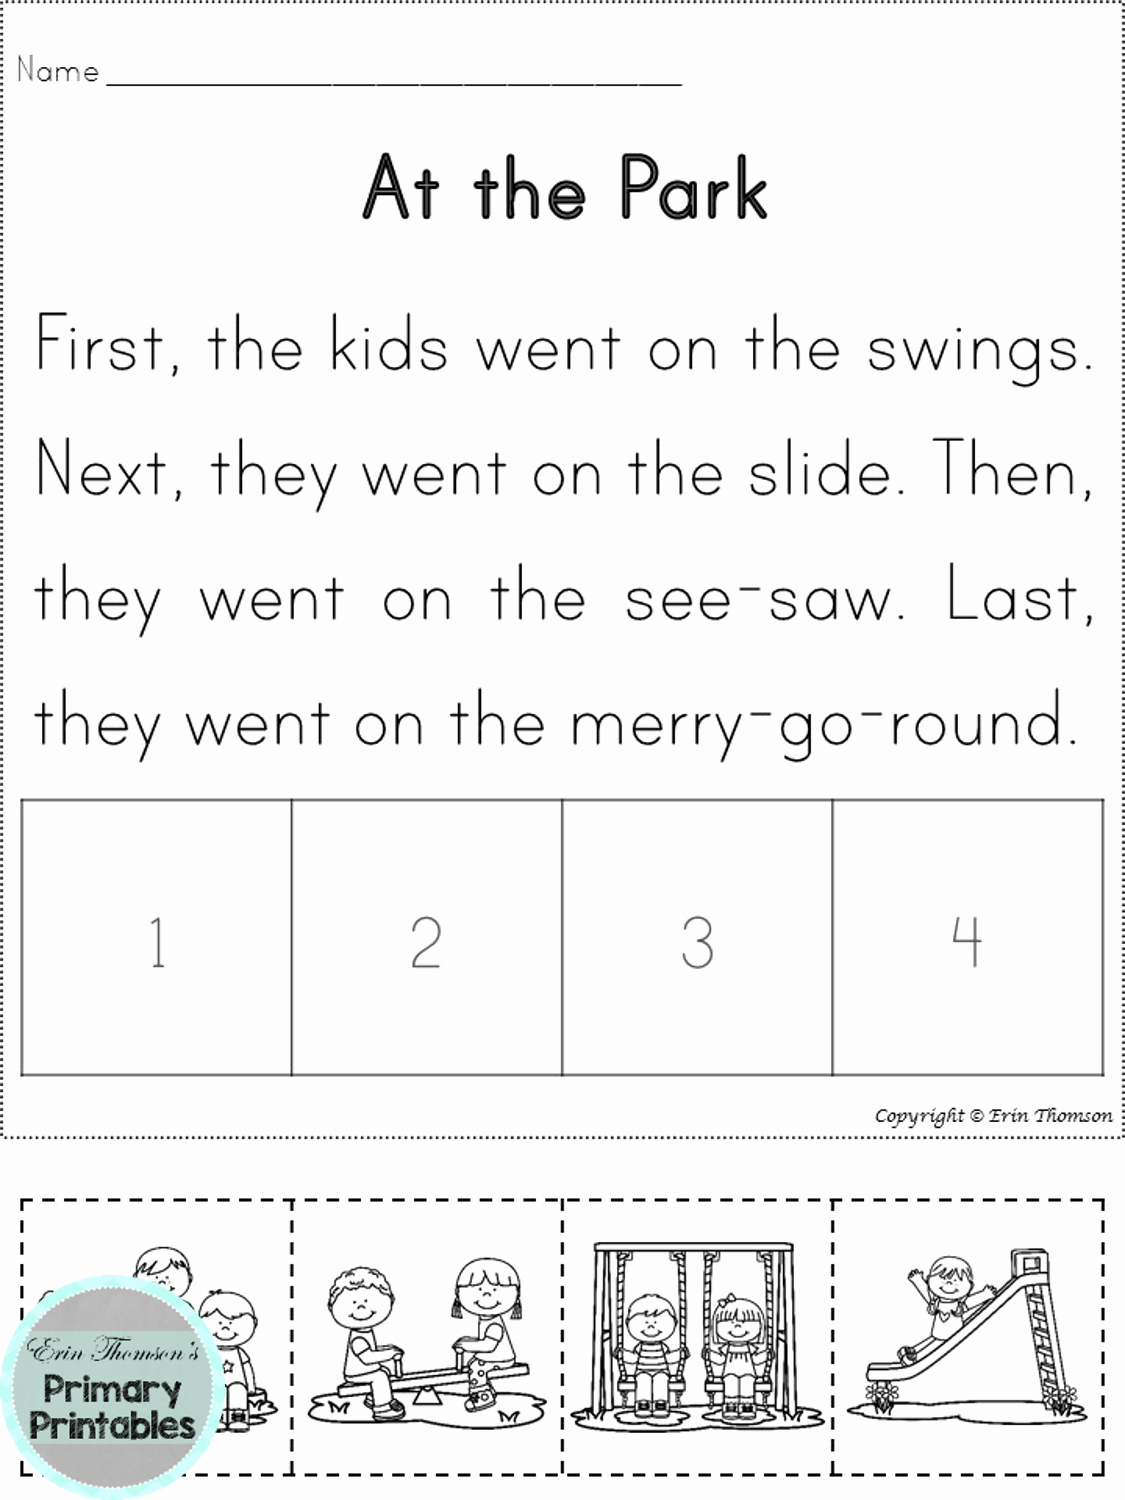 Sequencing Story Worksheets Unique 4 Part Sequencing Story at the Park First Next then